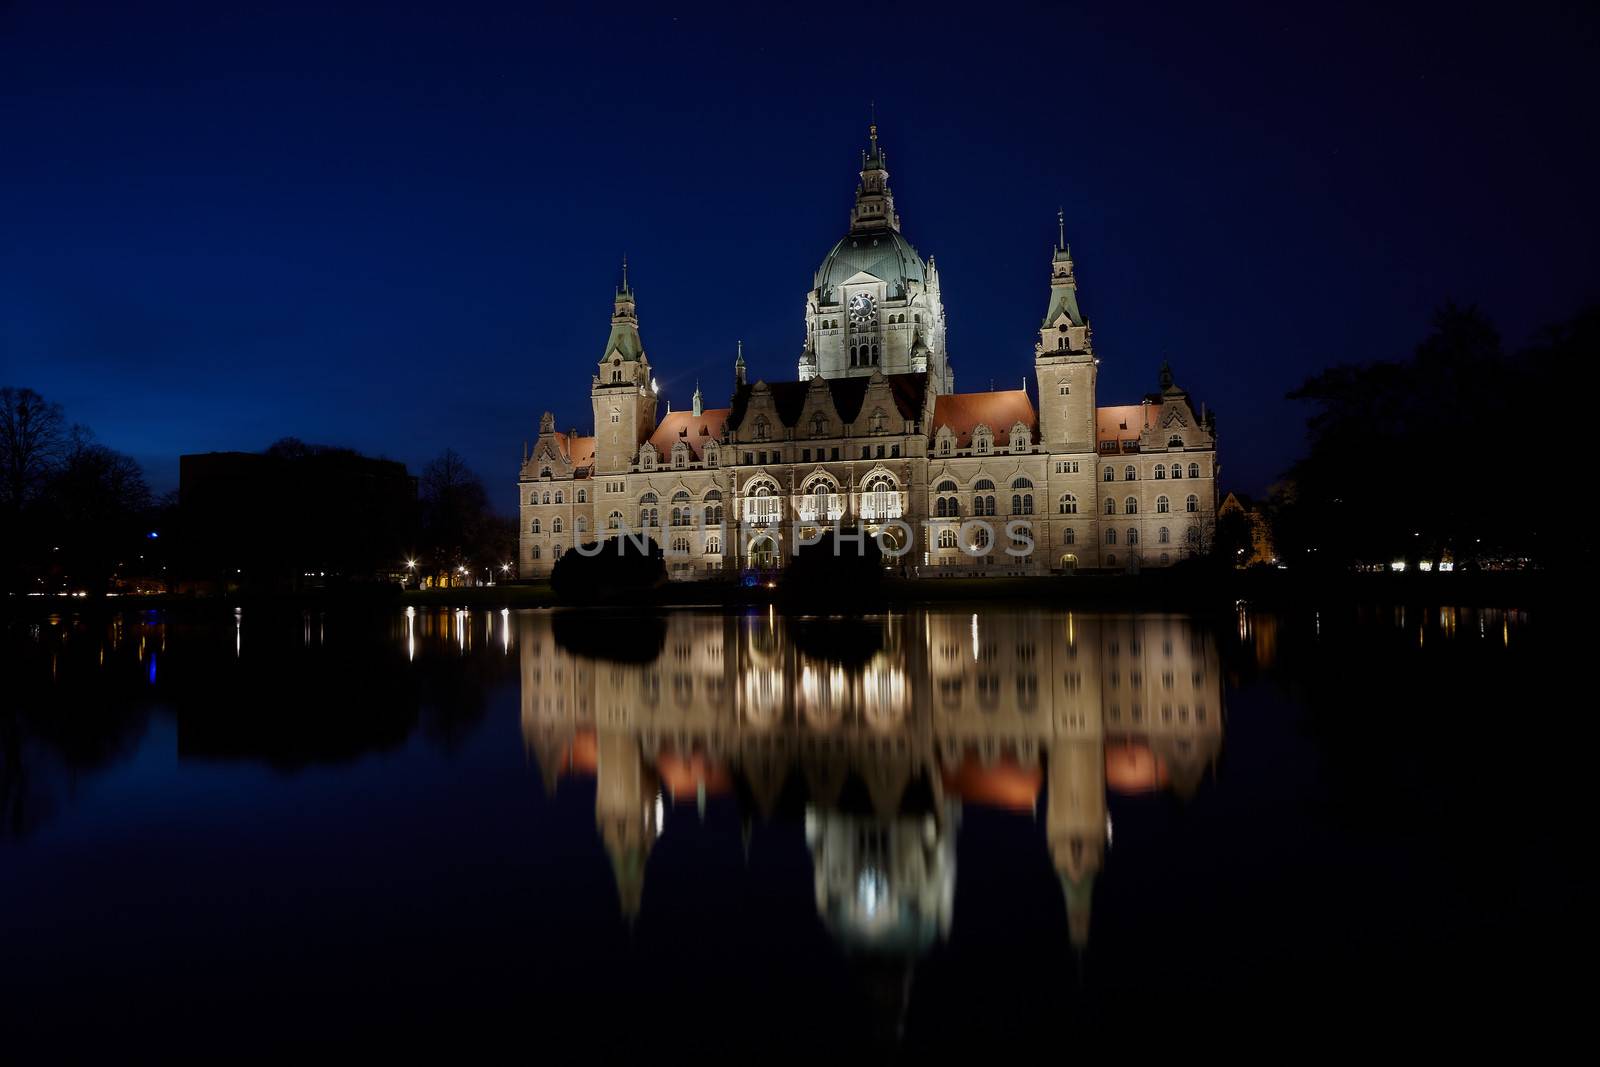 The New City Hall (German: Neues Rathaus) or New Town Hall in Hanover, Germany, is a city hall and was opened on July 20, 1913, after having been under construction for 12 years.